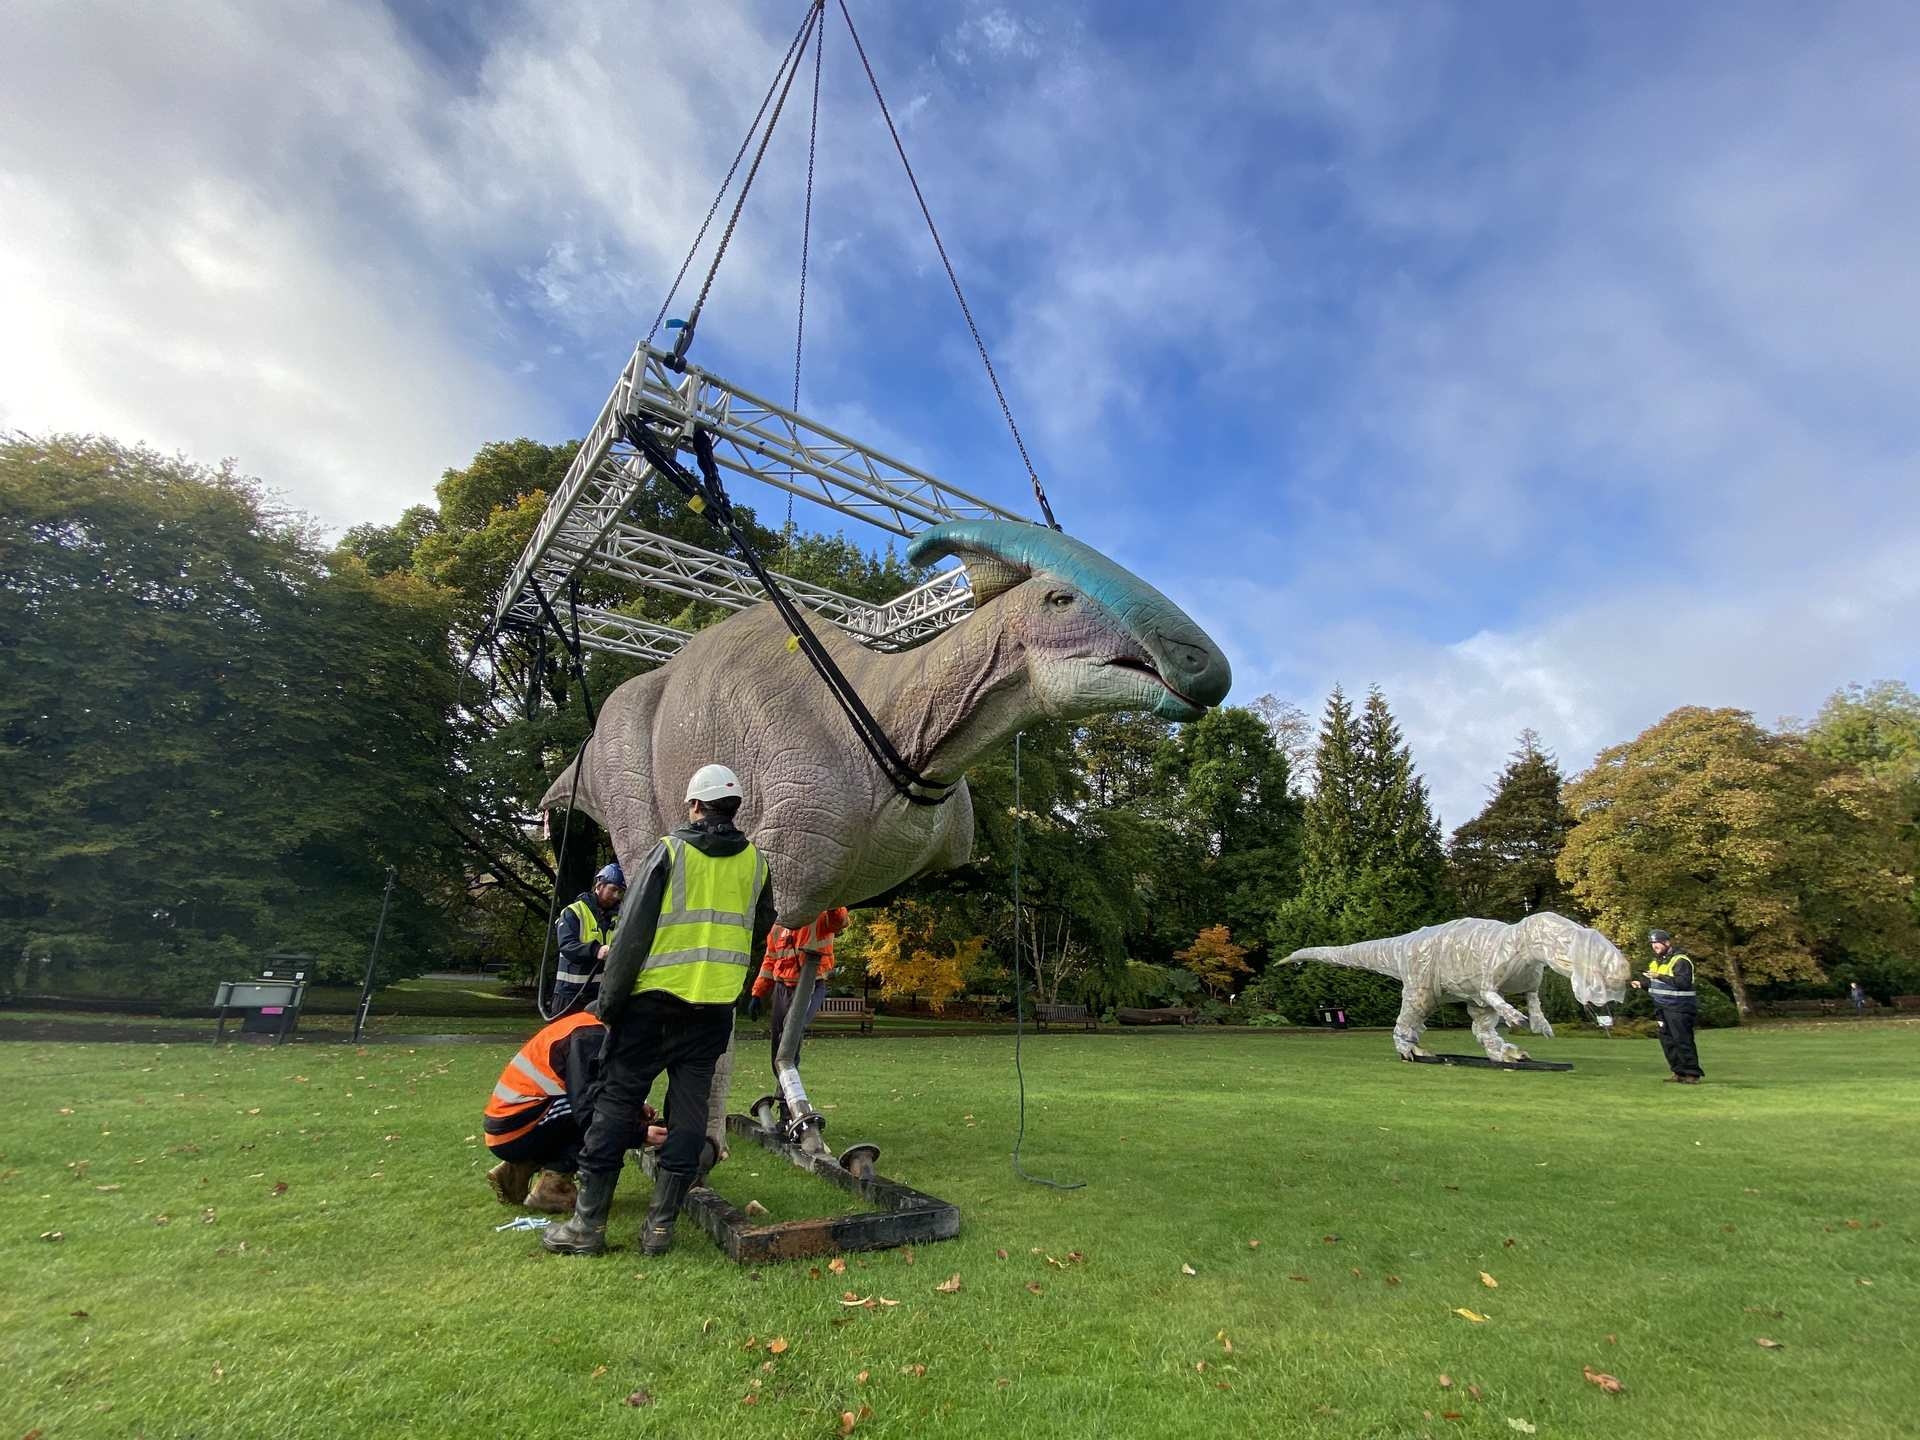 Some of the dinosaurs being set up in preparation. 